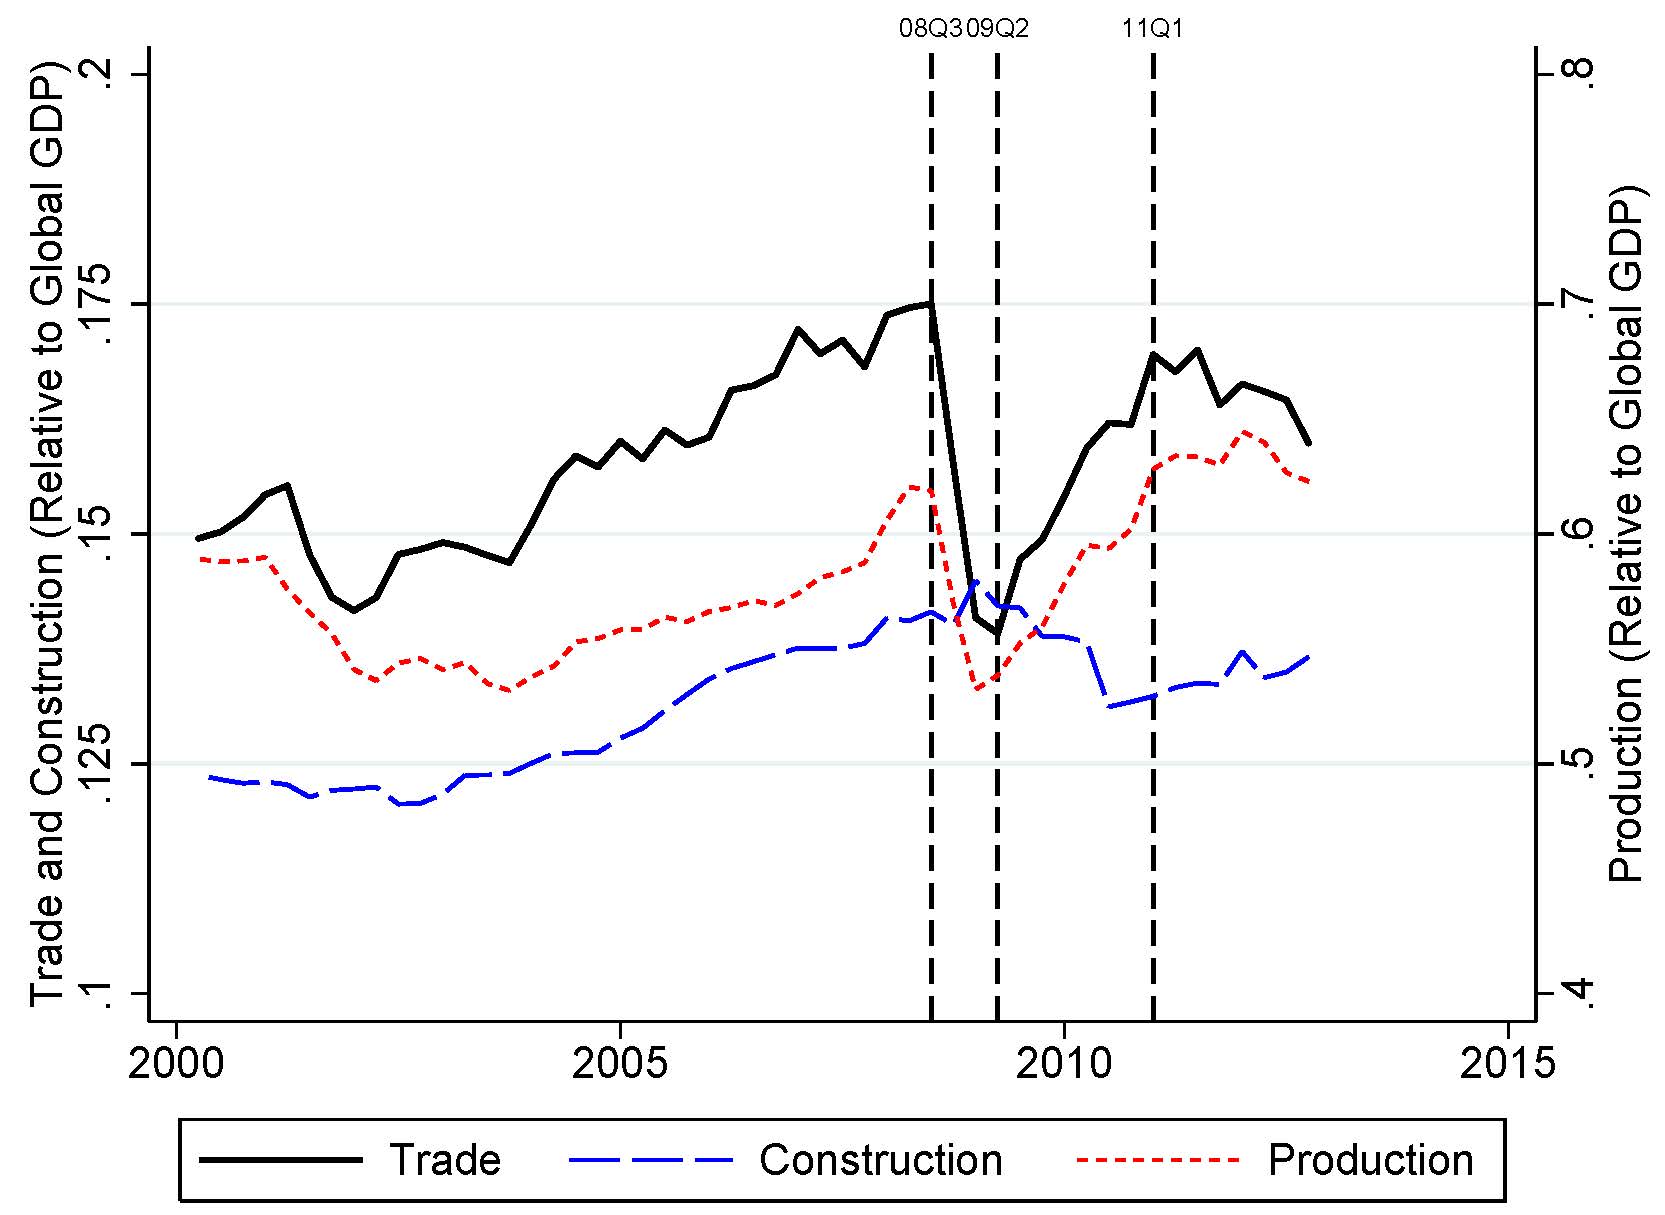 Figure of Global Trade, Production, and Construction Relative to GDP